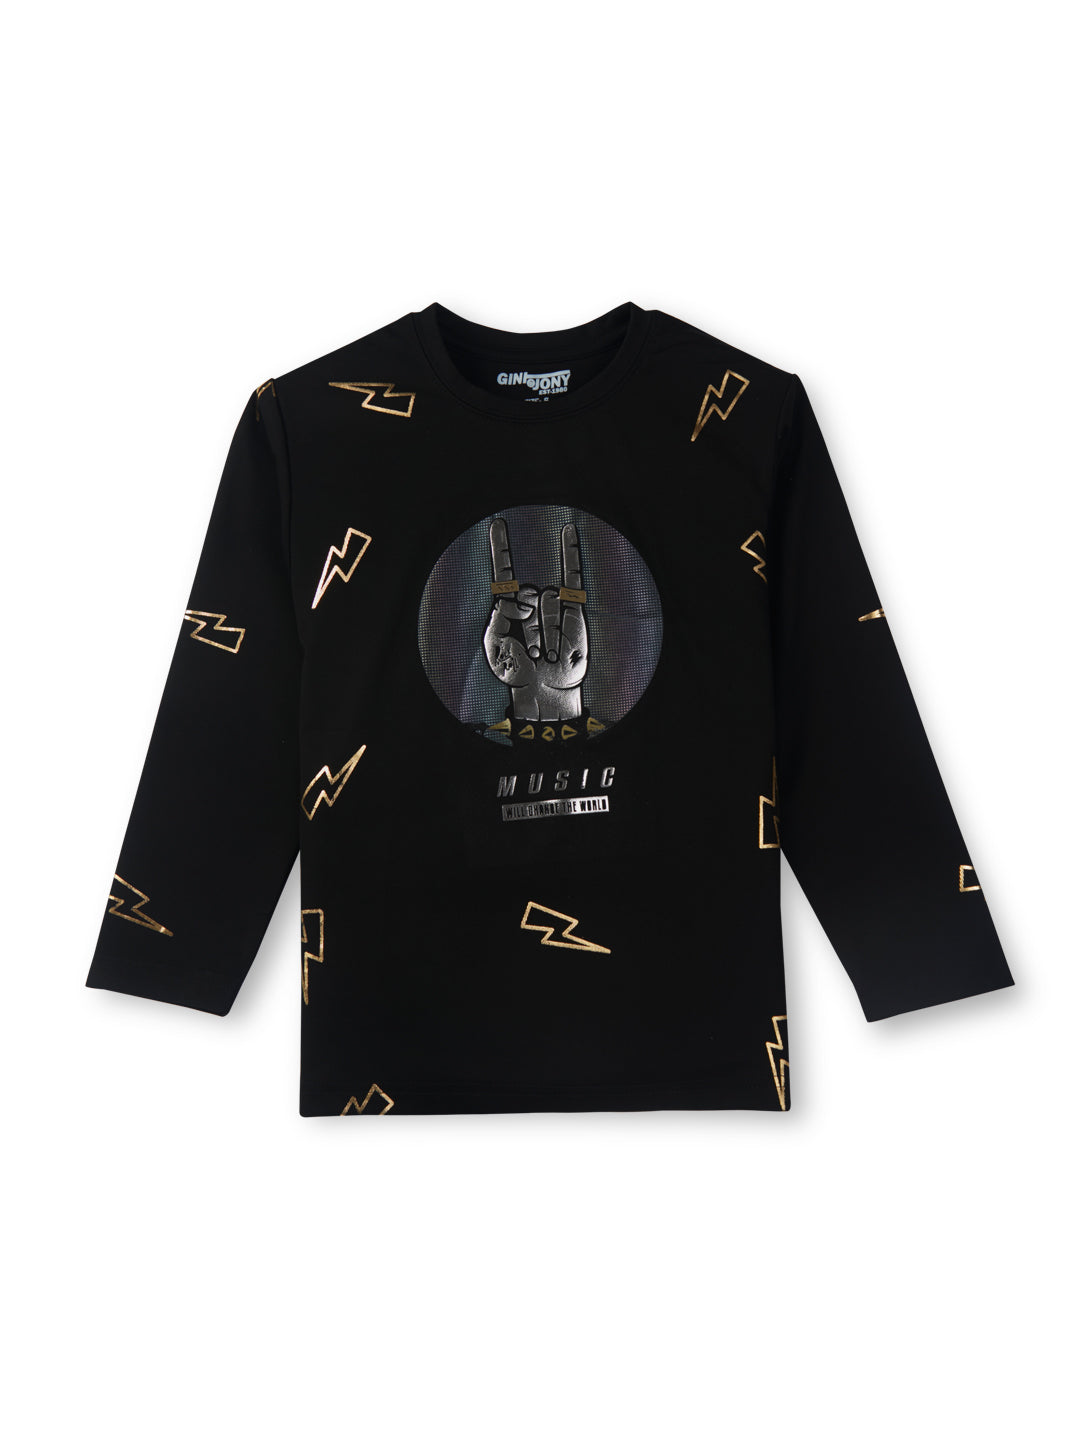 Boys black round neck knitted cotton printed t-shirt